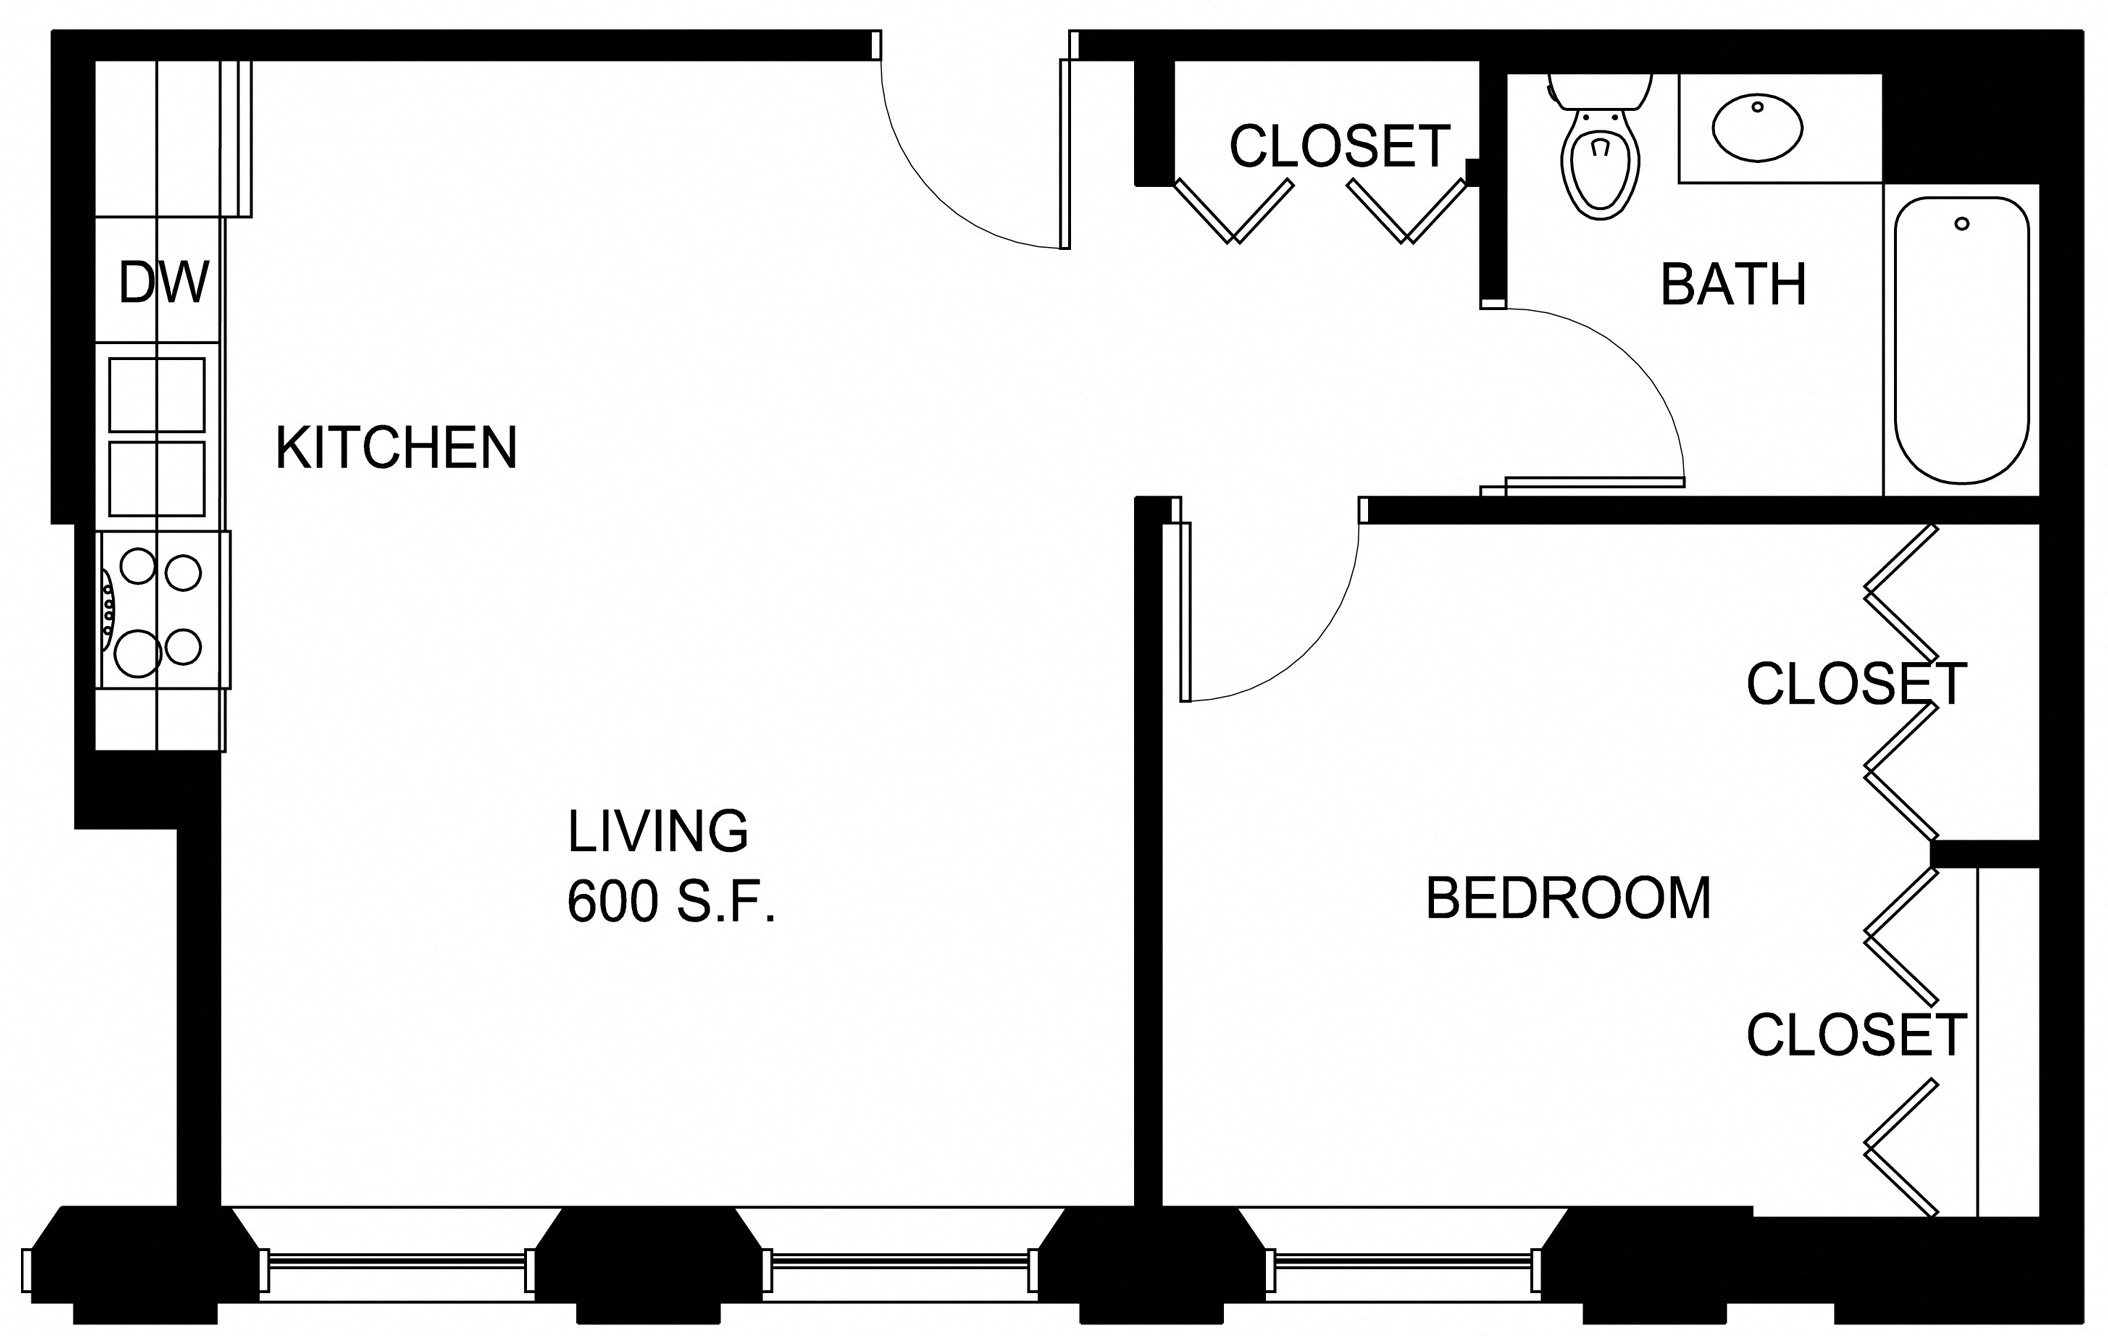 Floorplan for Apartment #P347, 1 bedroom unit at Halstead Providence